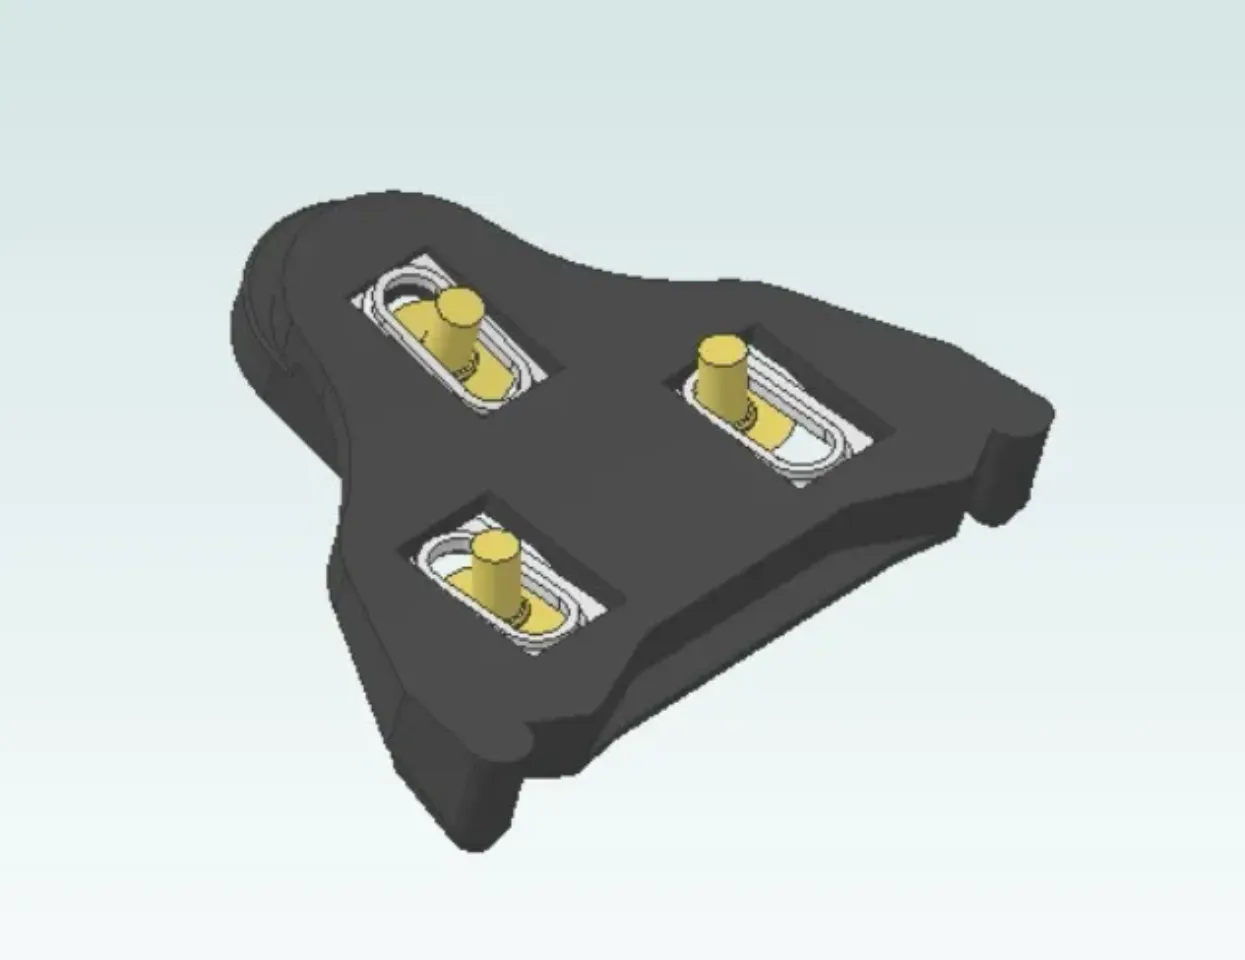 SM-SH45 SPD-SL CLEAT COVERS / COUVRE-CALES SPD-SL SM-SH45 by twist-lab, Download free STL model